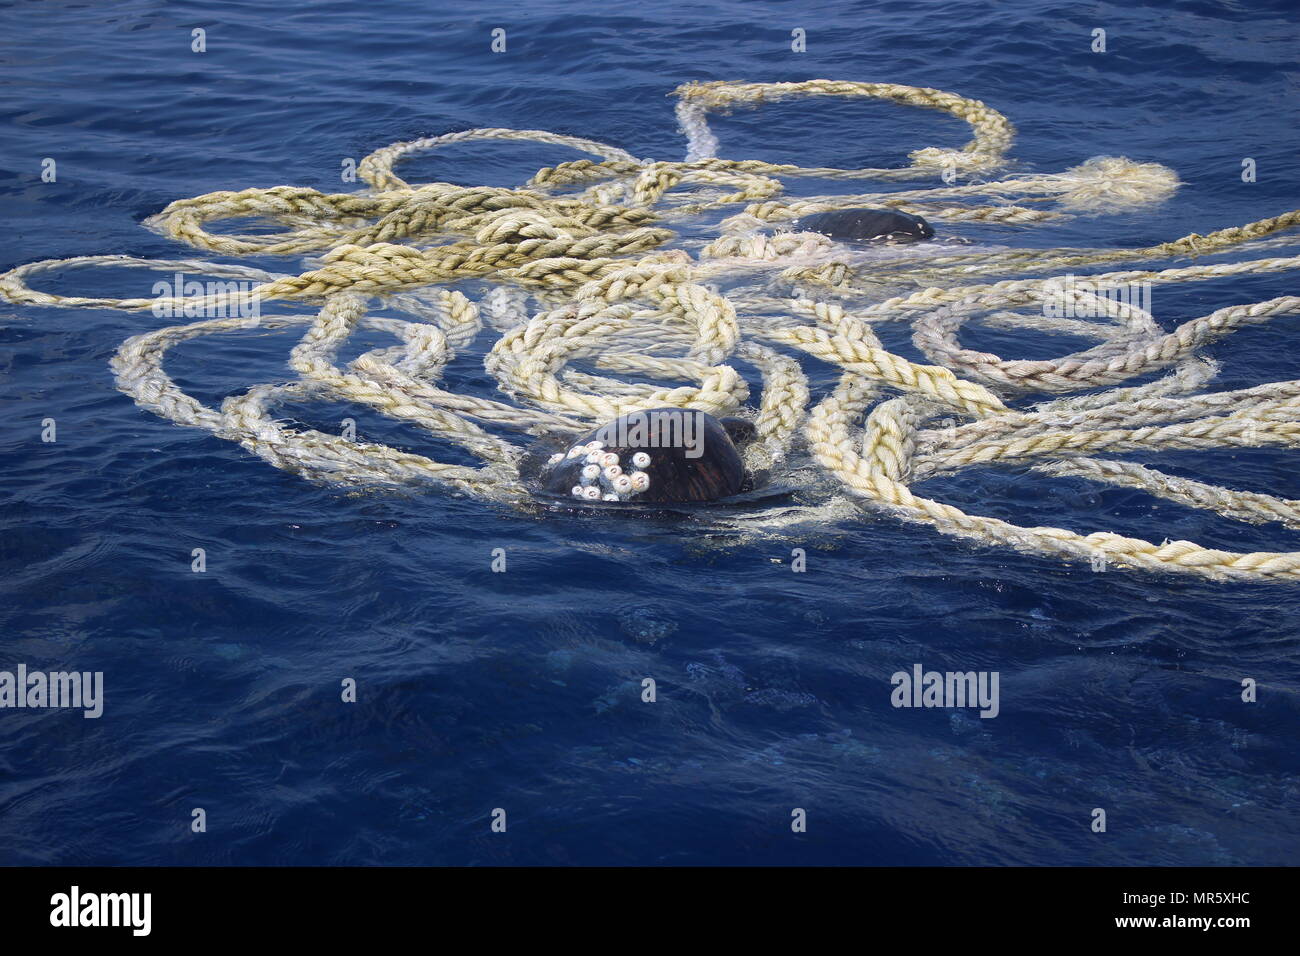 A sea turtle is entangled in a mass of fishing gear and garbage in the Eastern Pacific Ocean before being released by the crew of Coast Guard Cutter Valiant, April 23, 2017.    The crew freed one baby and three adult olive ridley sea turtles. (U.S. Coast Guard courtesy photo.) Stock Photo